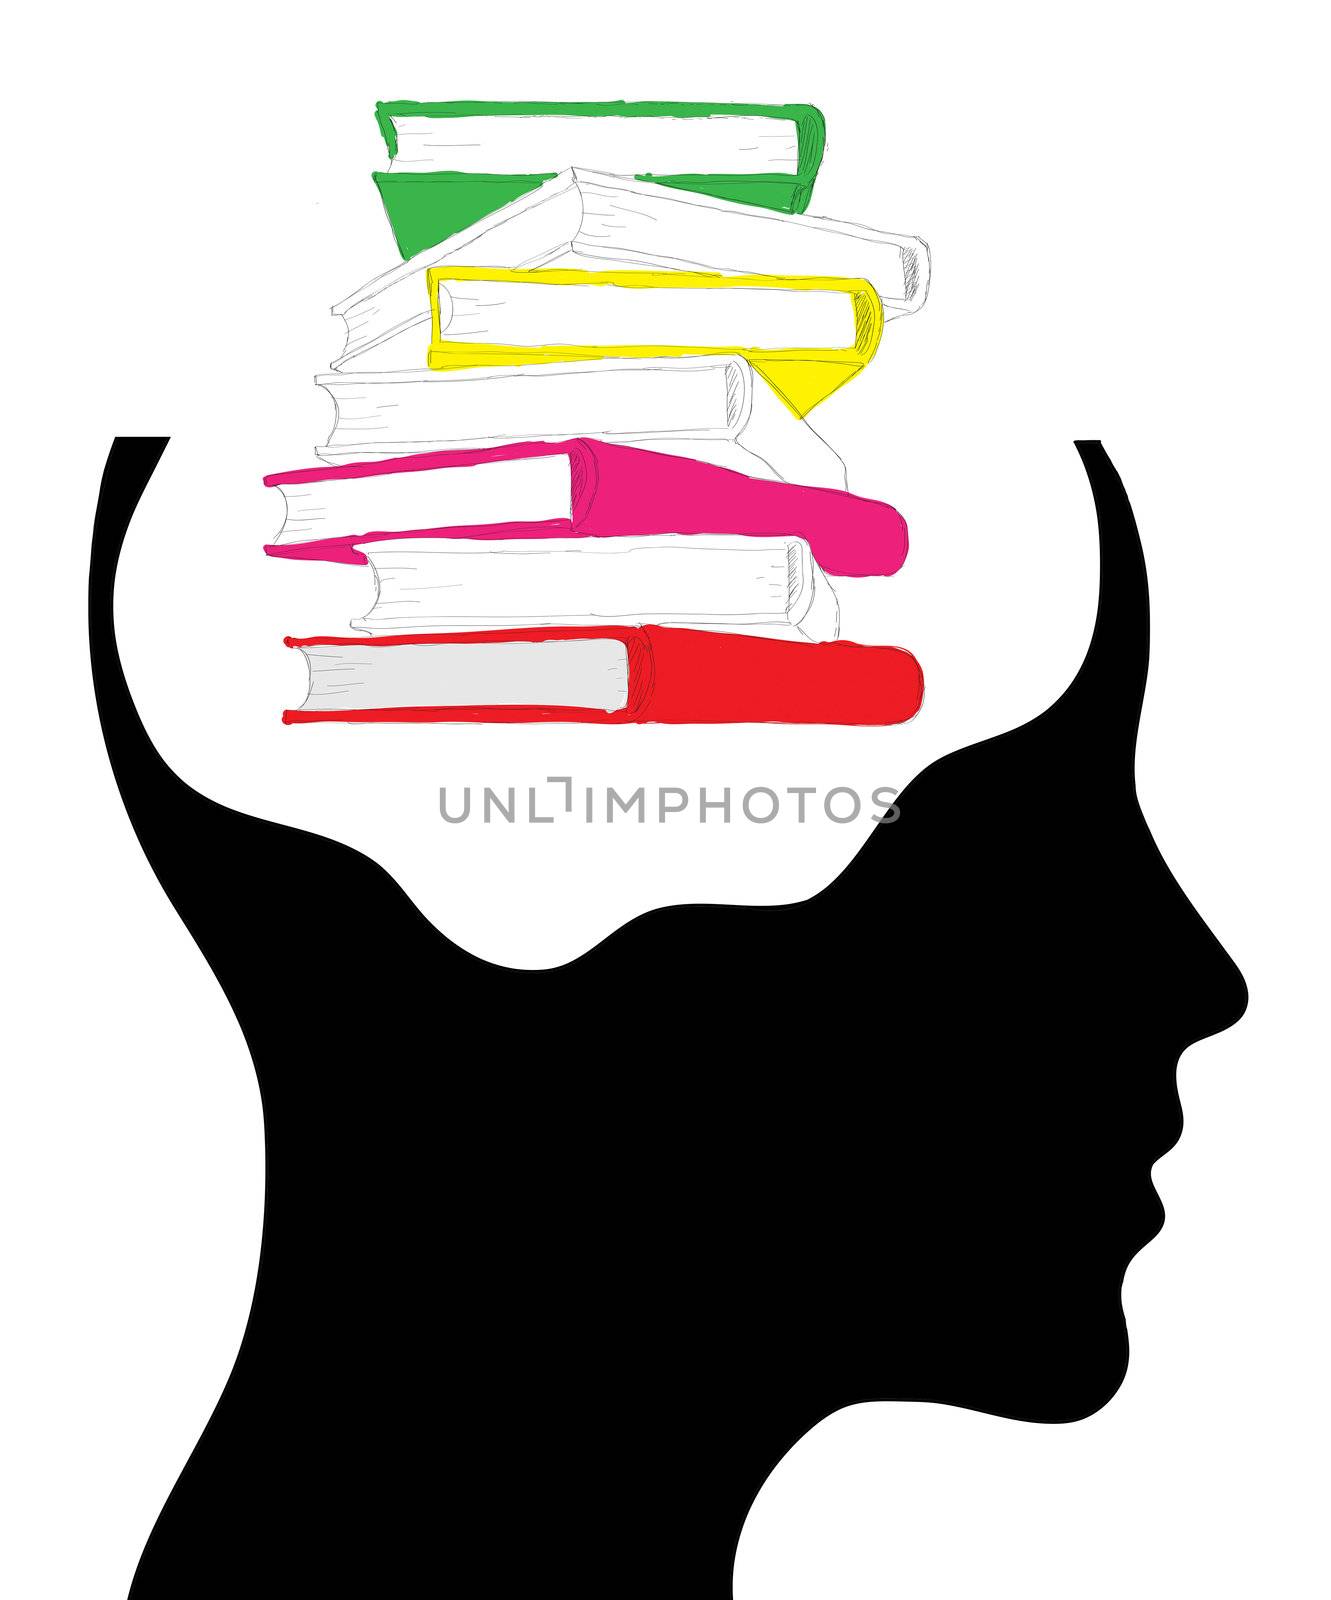 Male head silhouette with stack of books - education